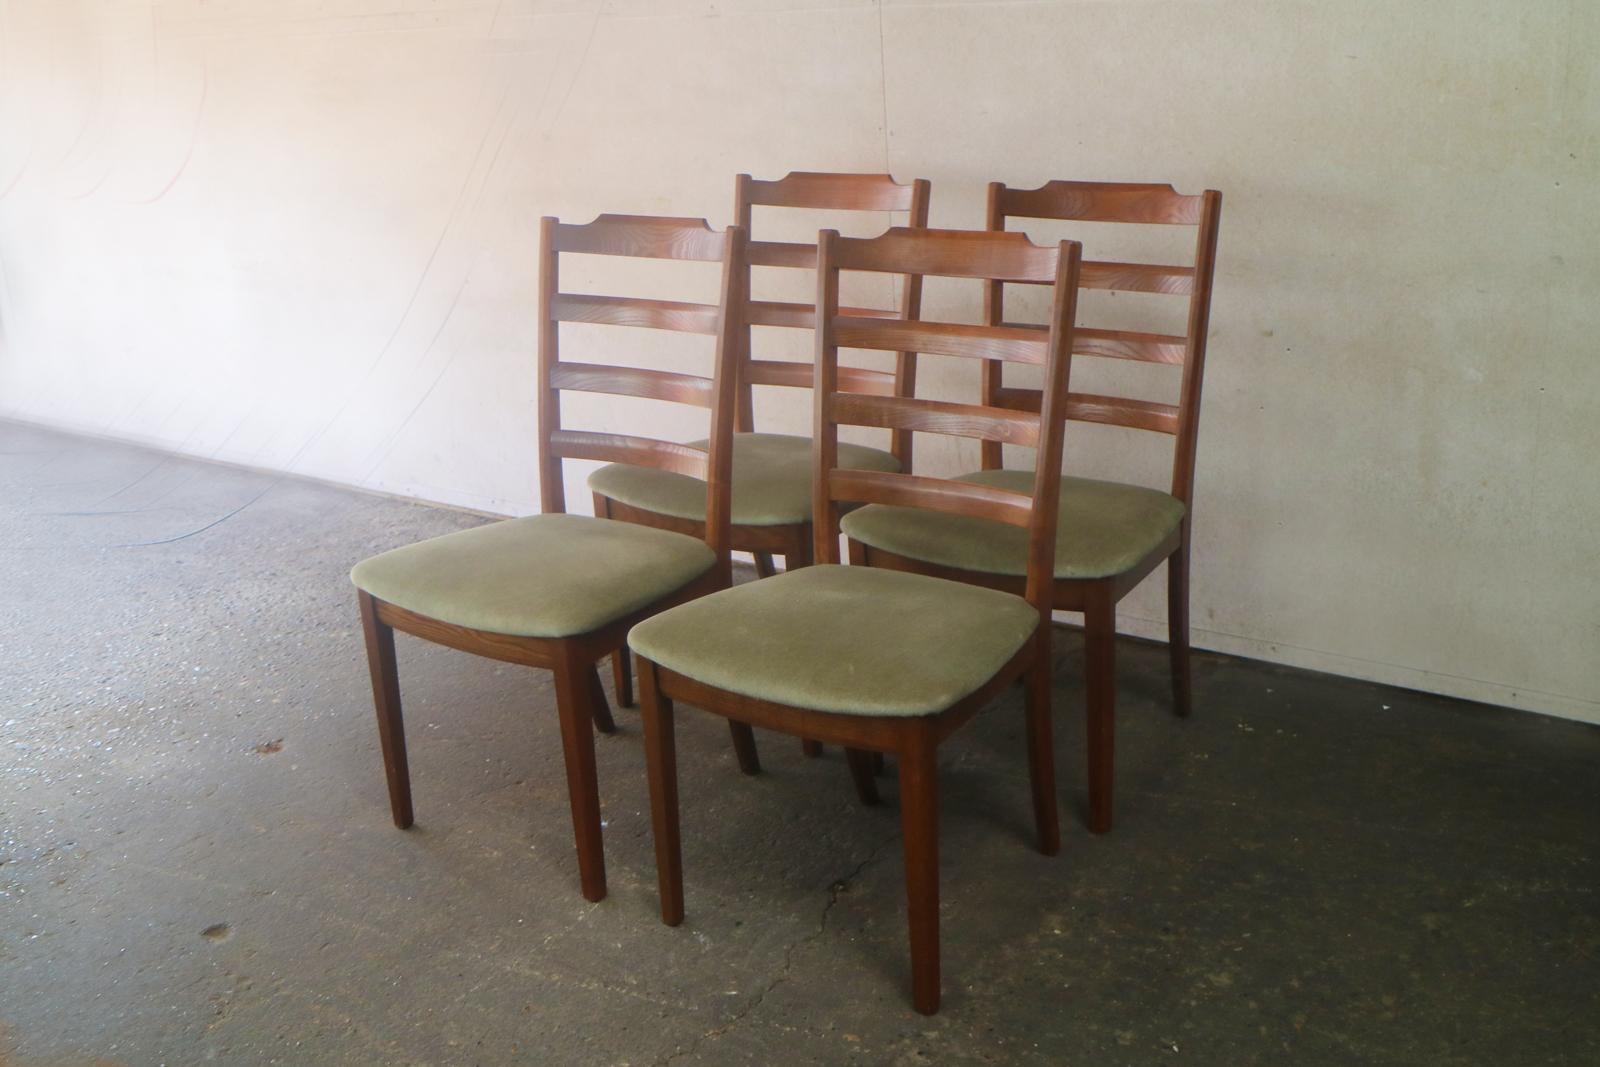 British 1970s Mid-Century Modern Large G Plan Dining Table and Chairs For Sale